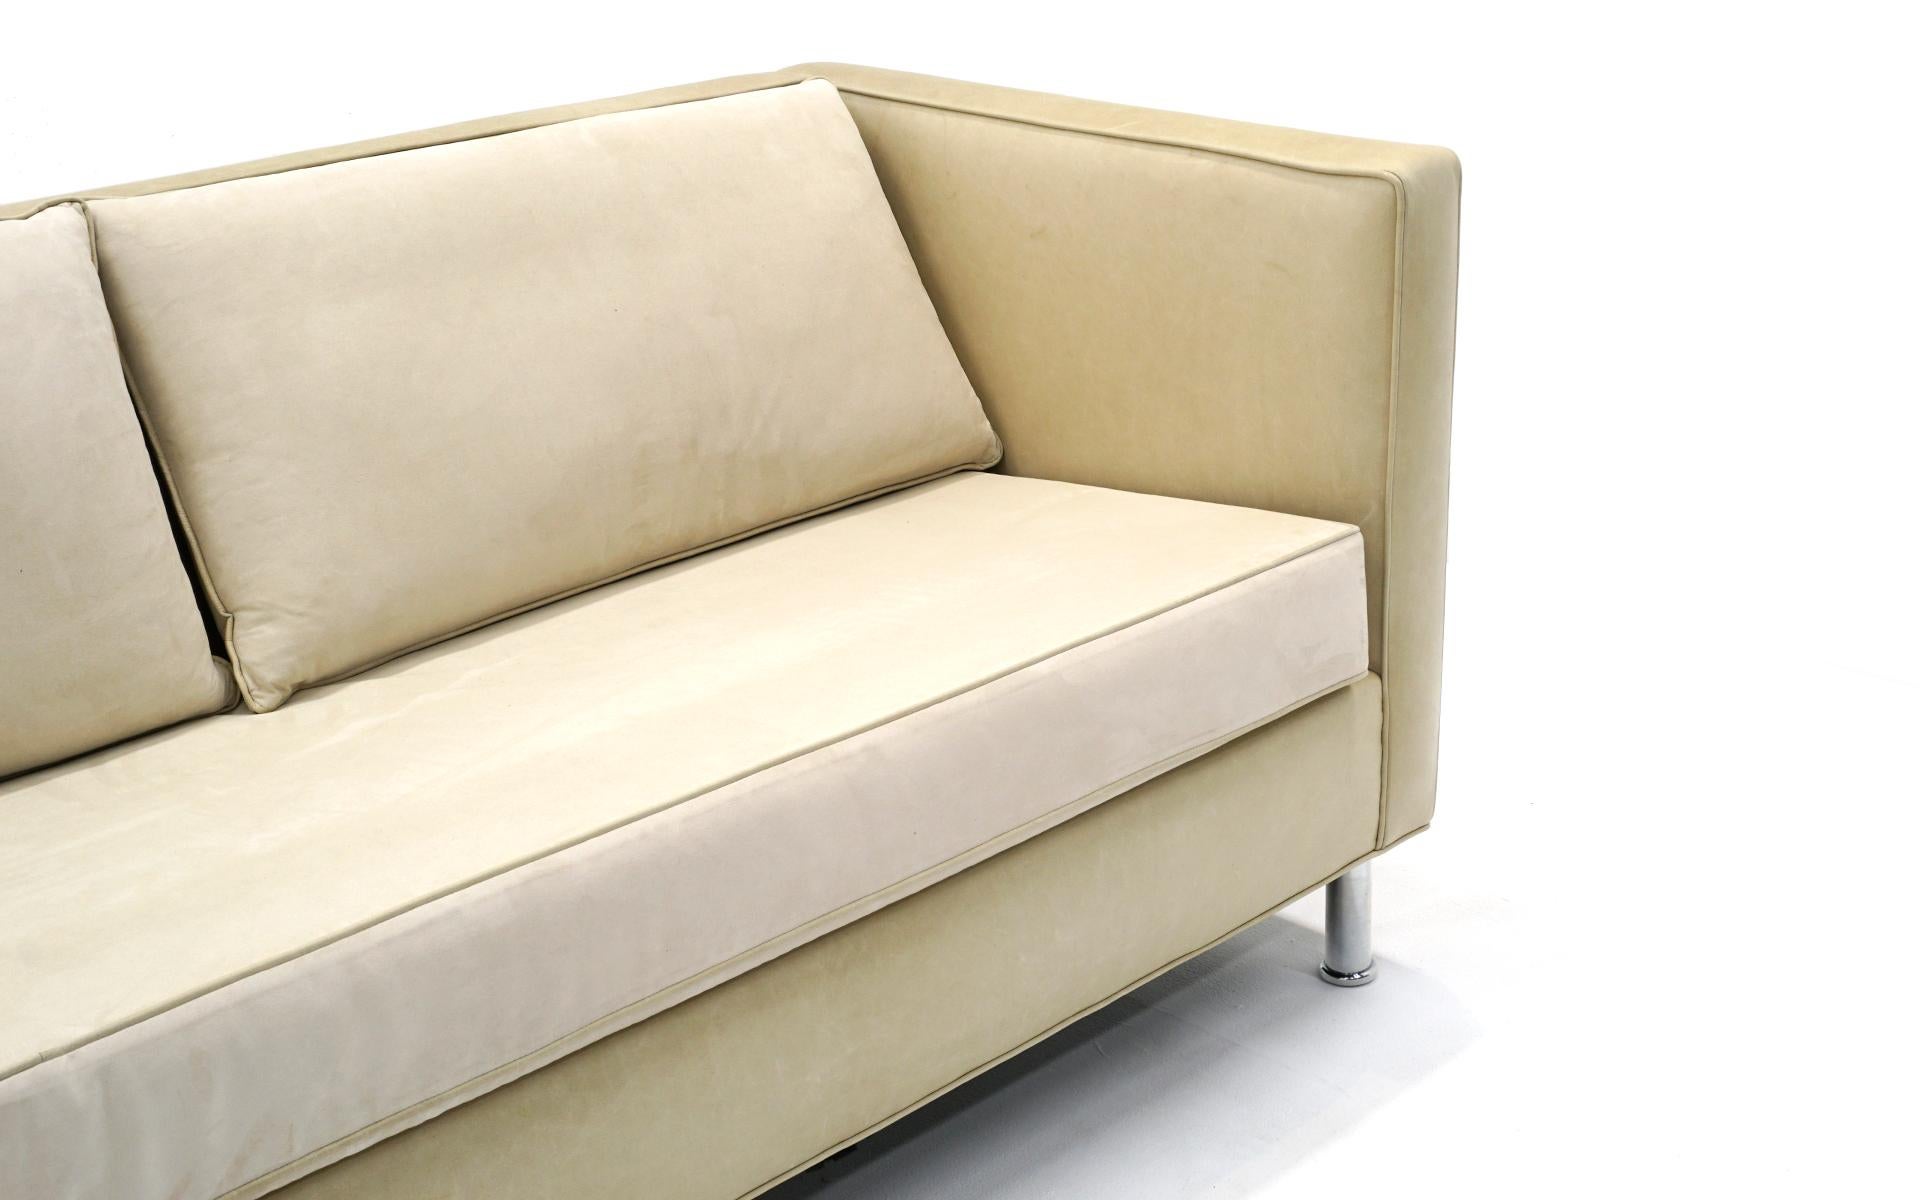 Modern Sofa in Off White /Beige Leather with Mohair Cushions by Niedermaier, Chicago